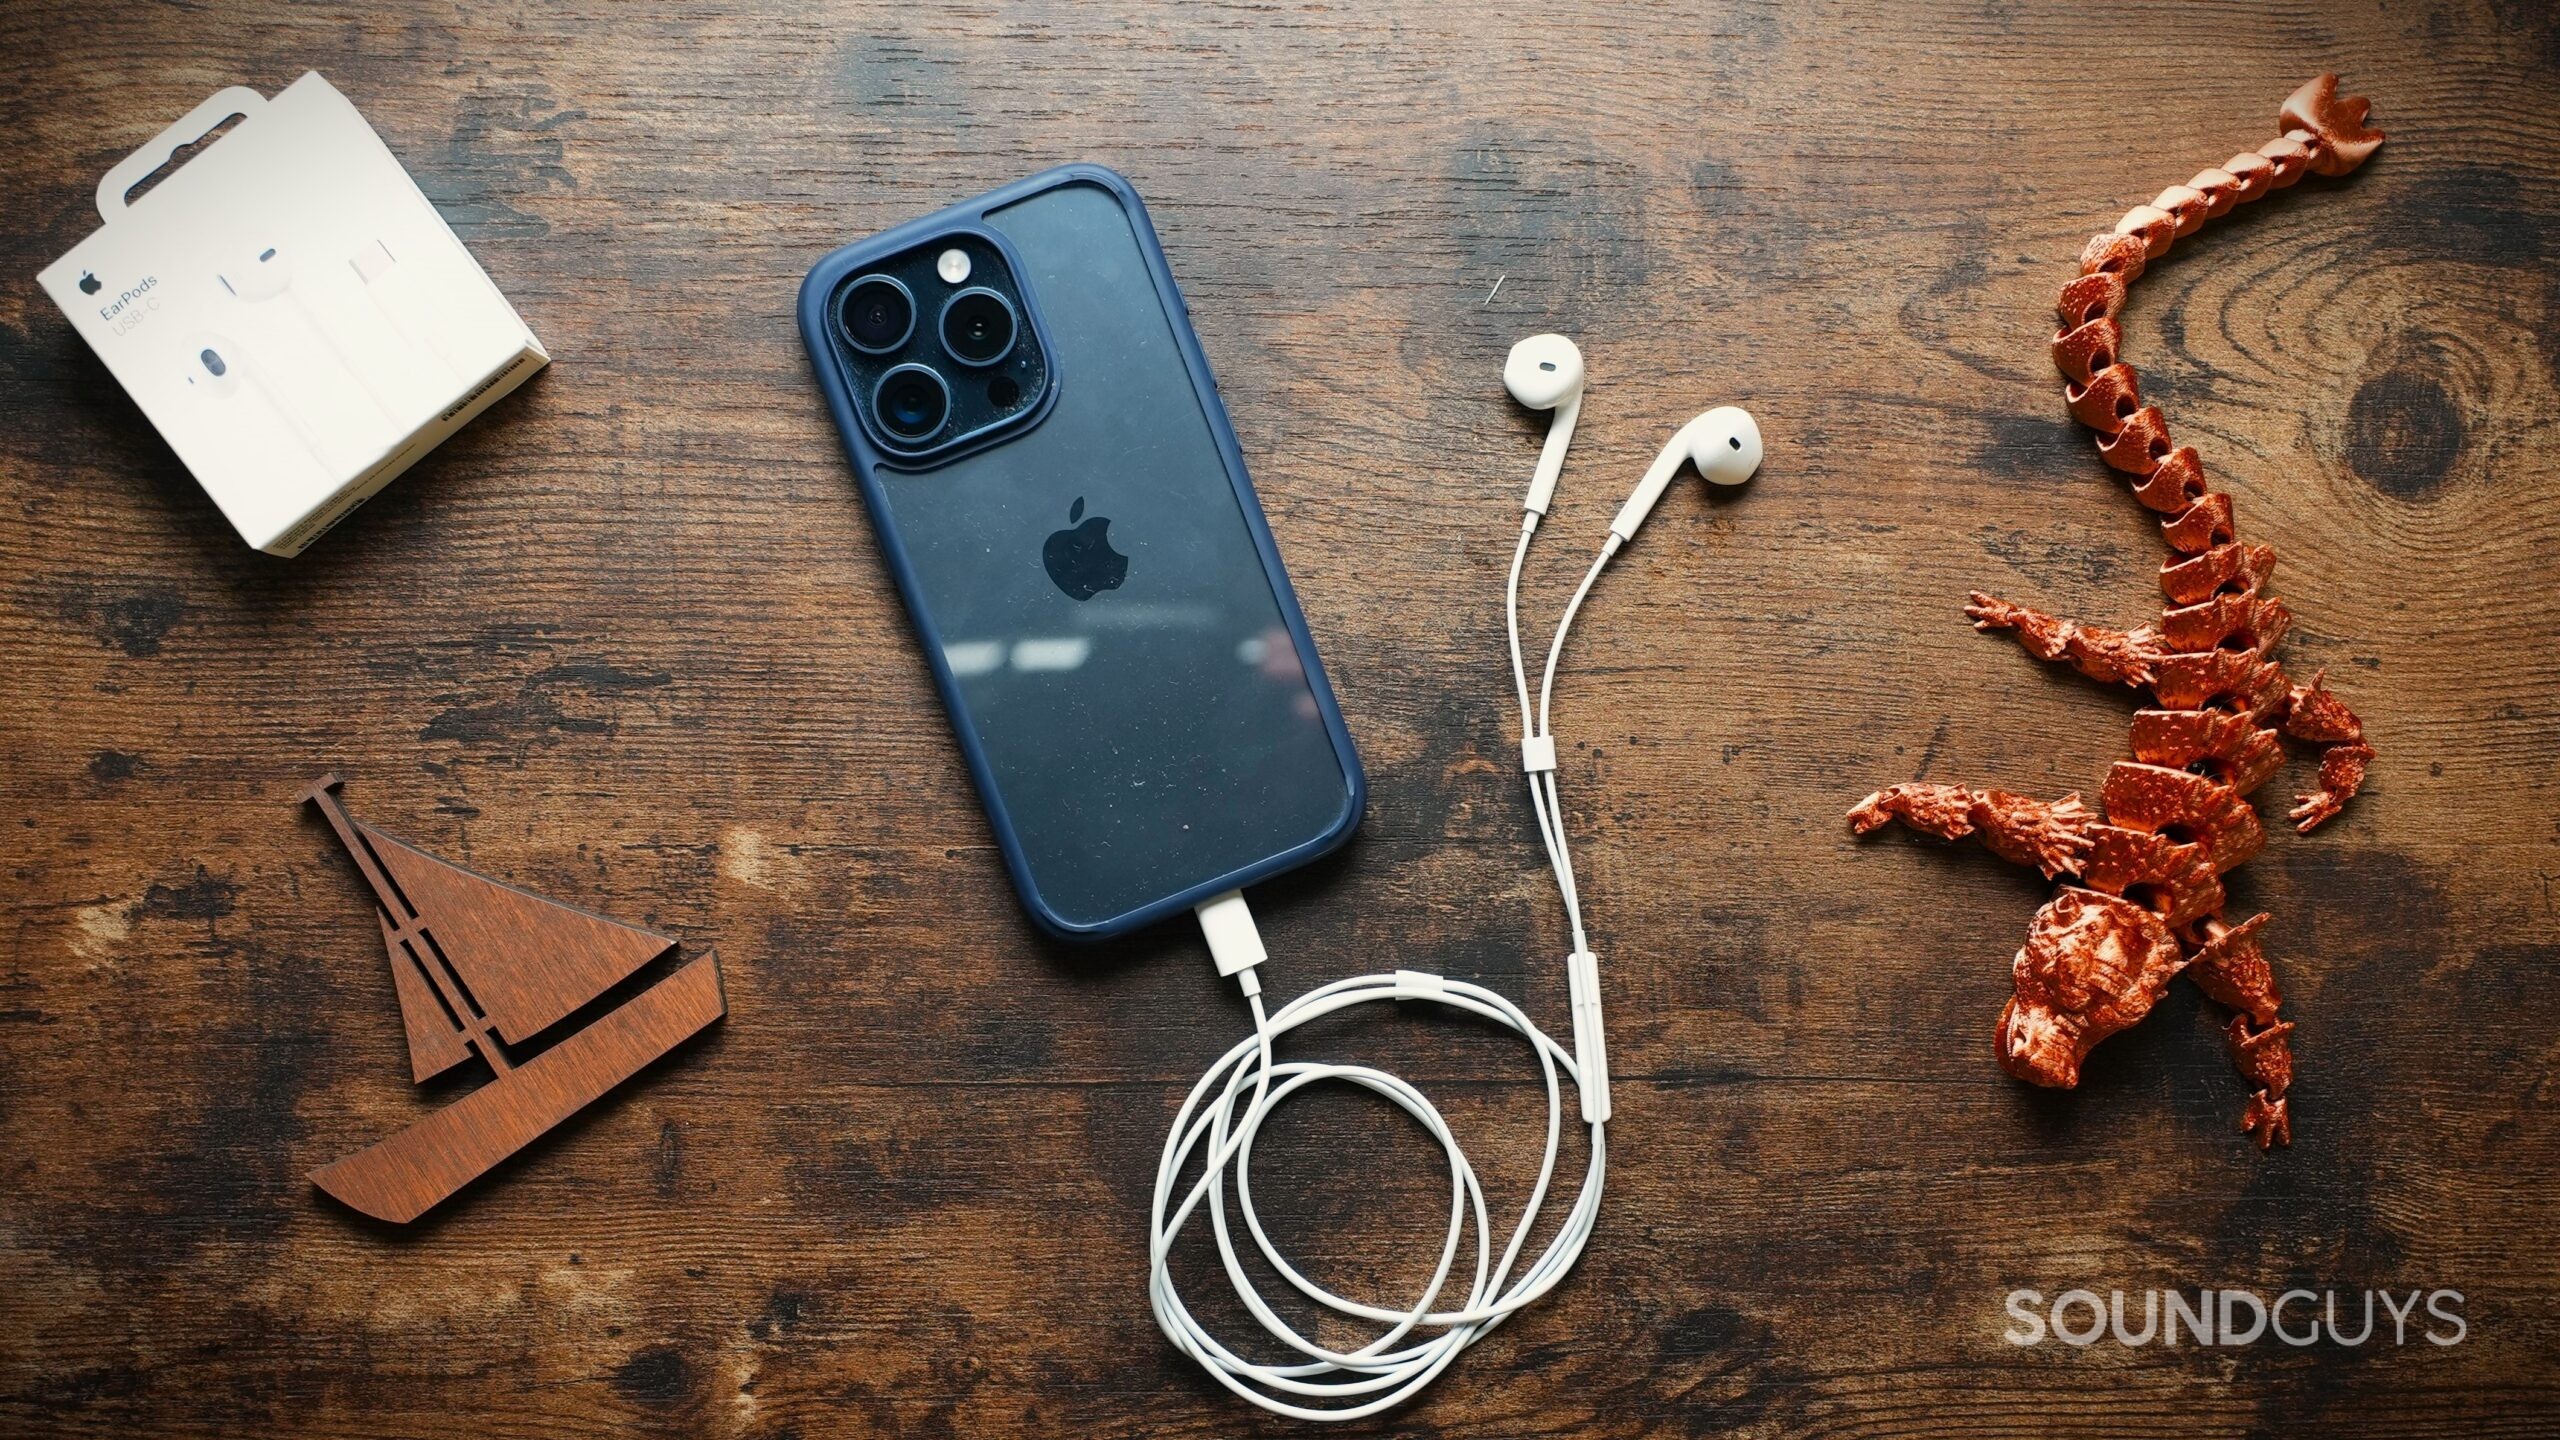 Apple EarPods (USB-C) plugged into a blue iPhone on a wooden table next to a copper 3D printed Dragon and a wooden cutout of a boat.